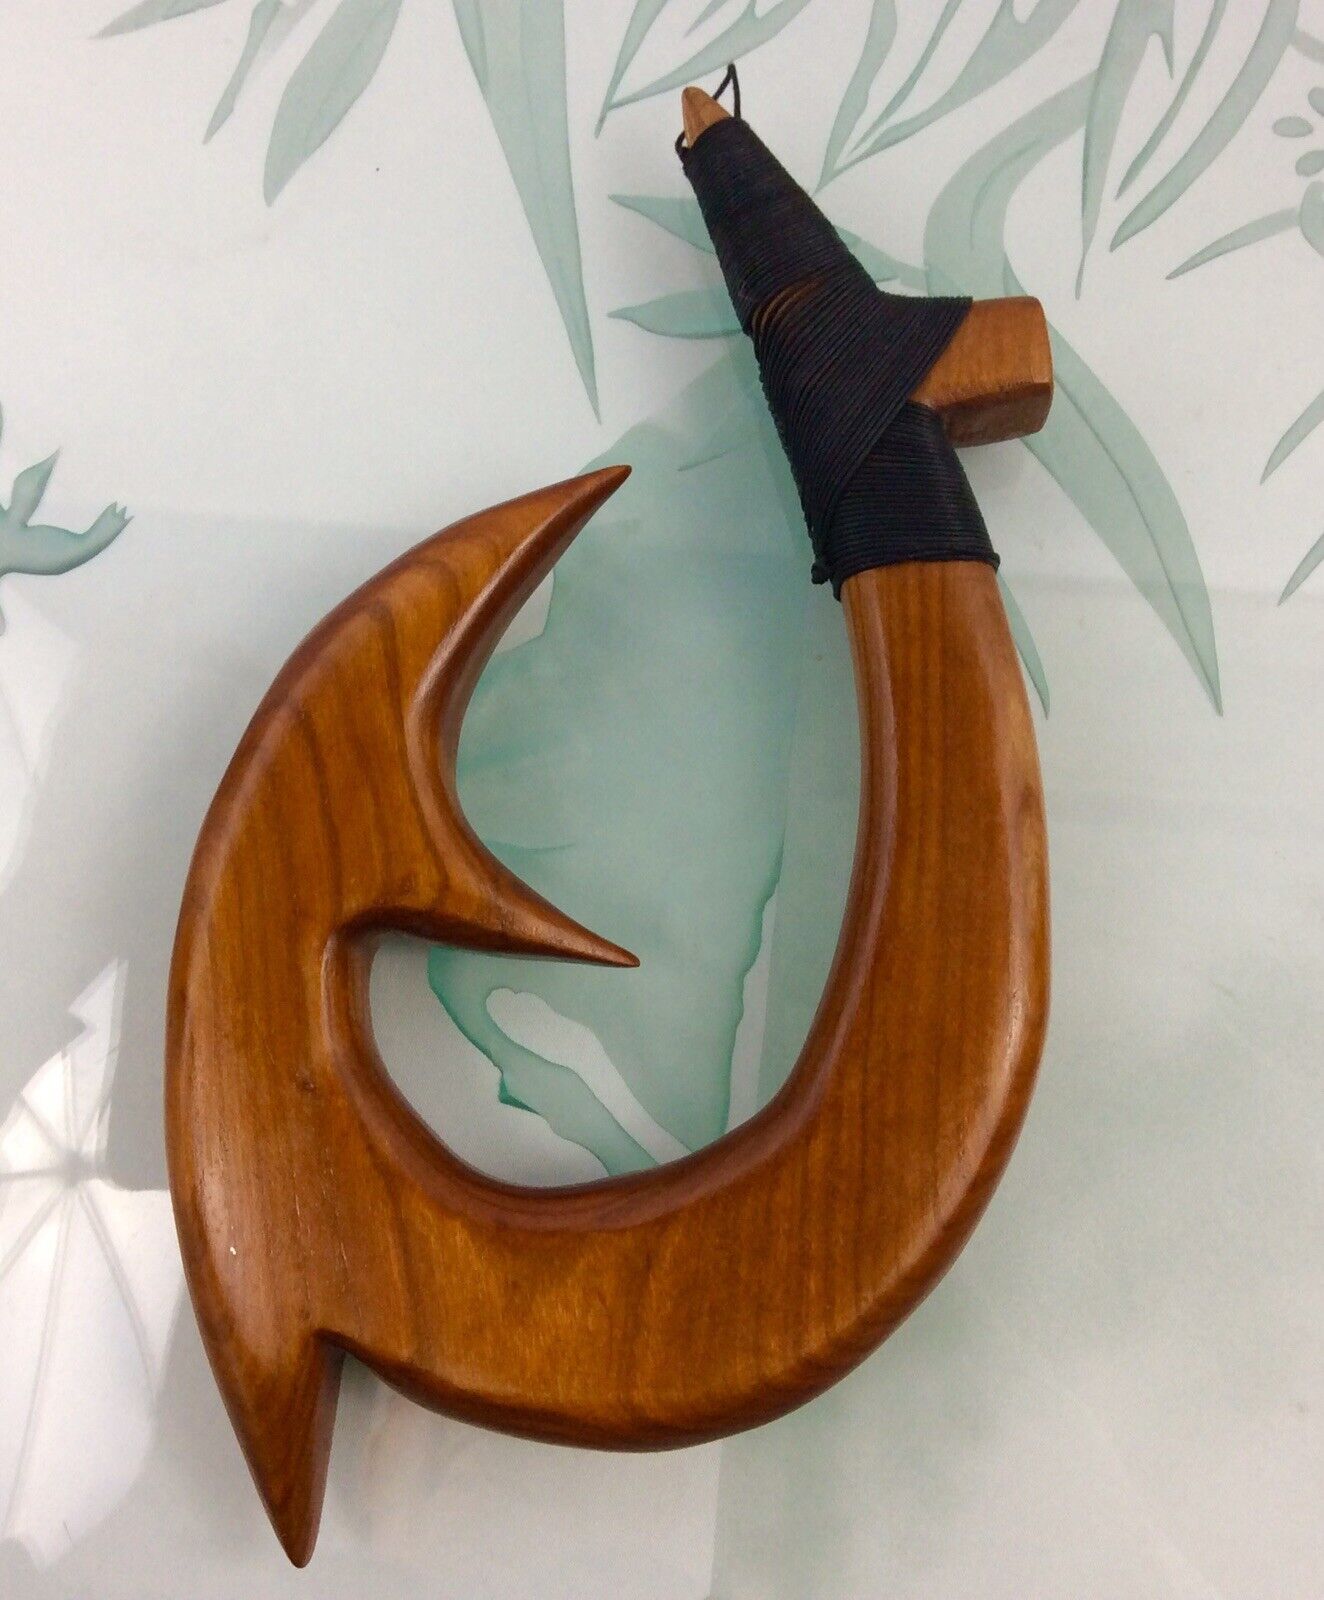 Hawaiian Fishhook Hand Carved From Curly Maple Wood(size 10 1/2”T By 6”W By 1” D